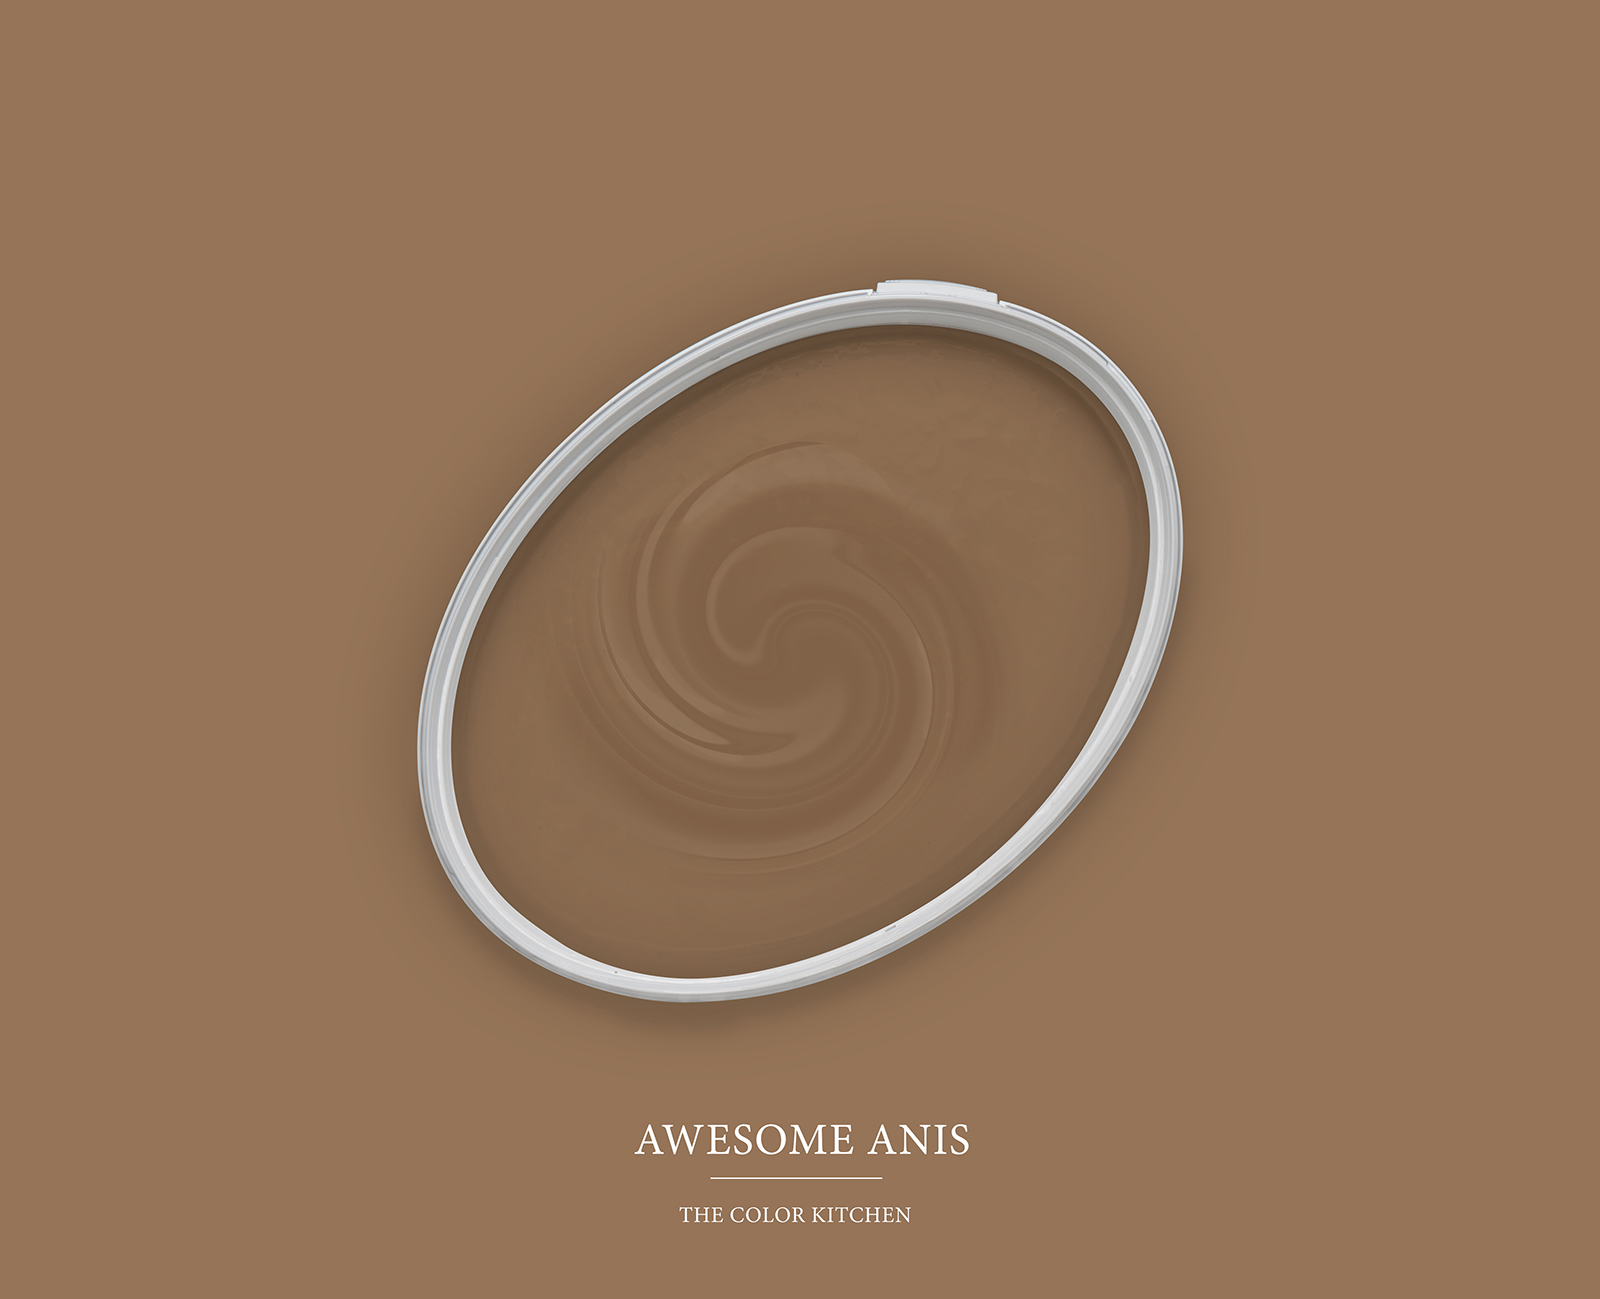         Wall Paint TCK6007 »Awesome Anis« in cosy brown – 2.5 litre
    